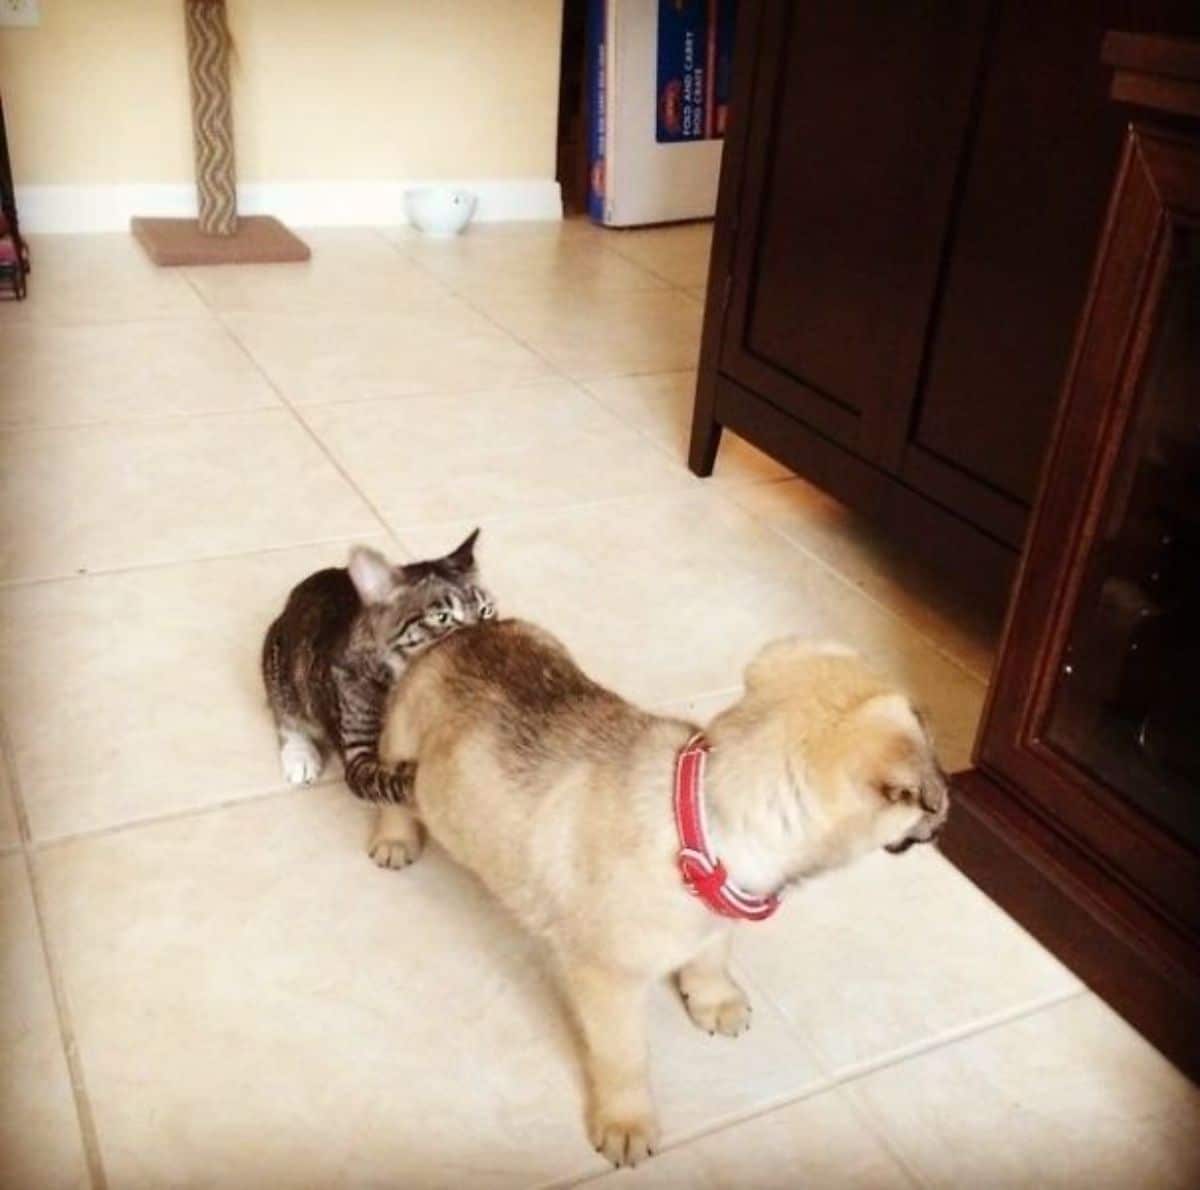 grey and white tabby cat attacking the butt of a small brown and black dog